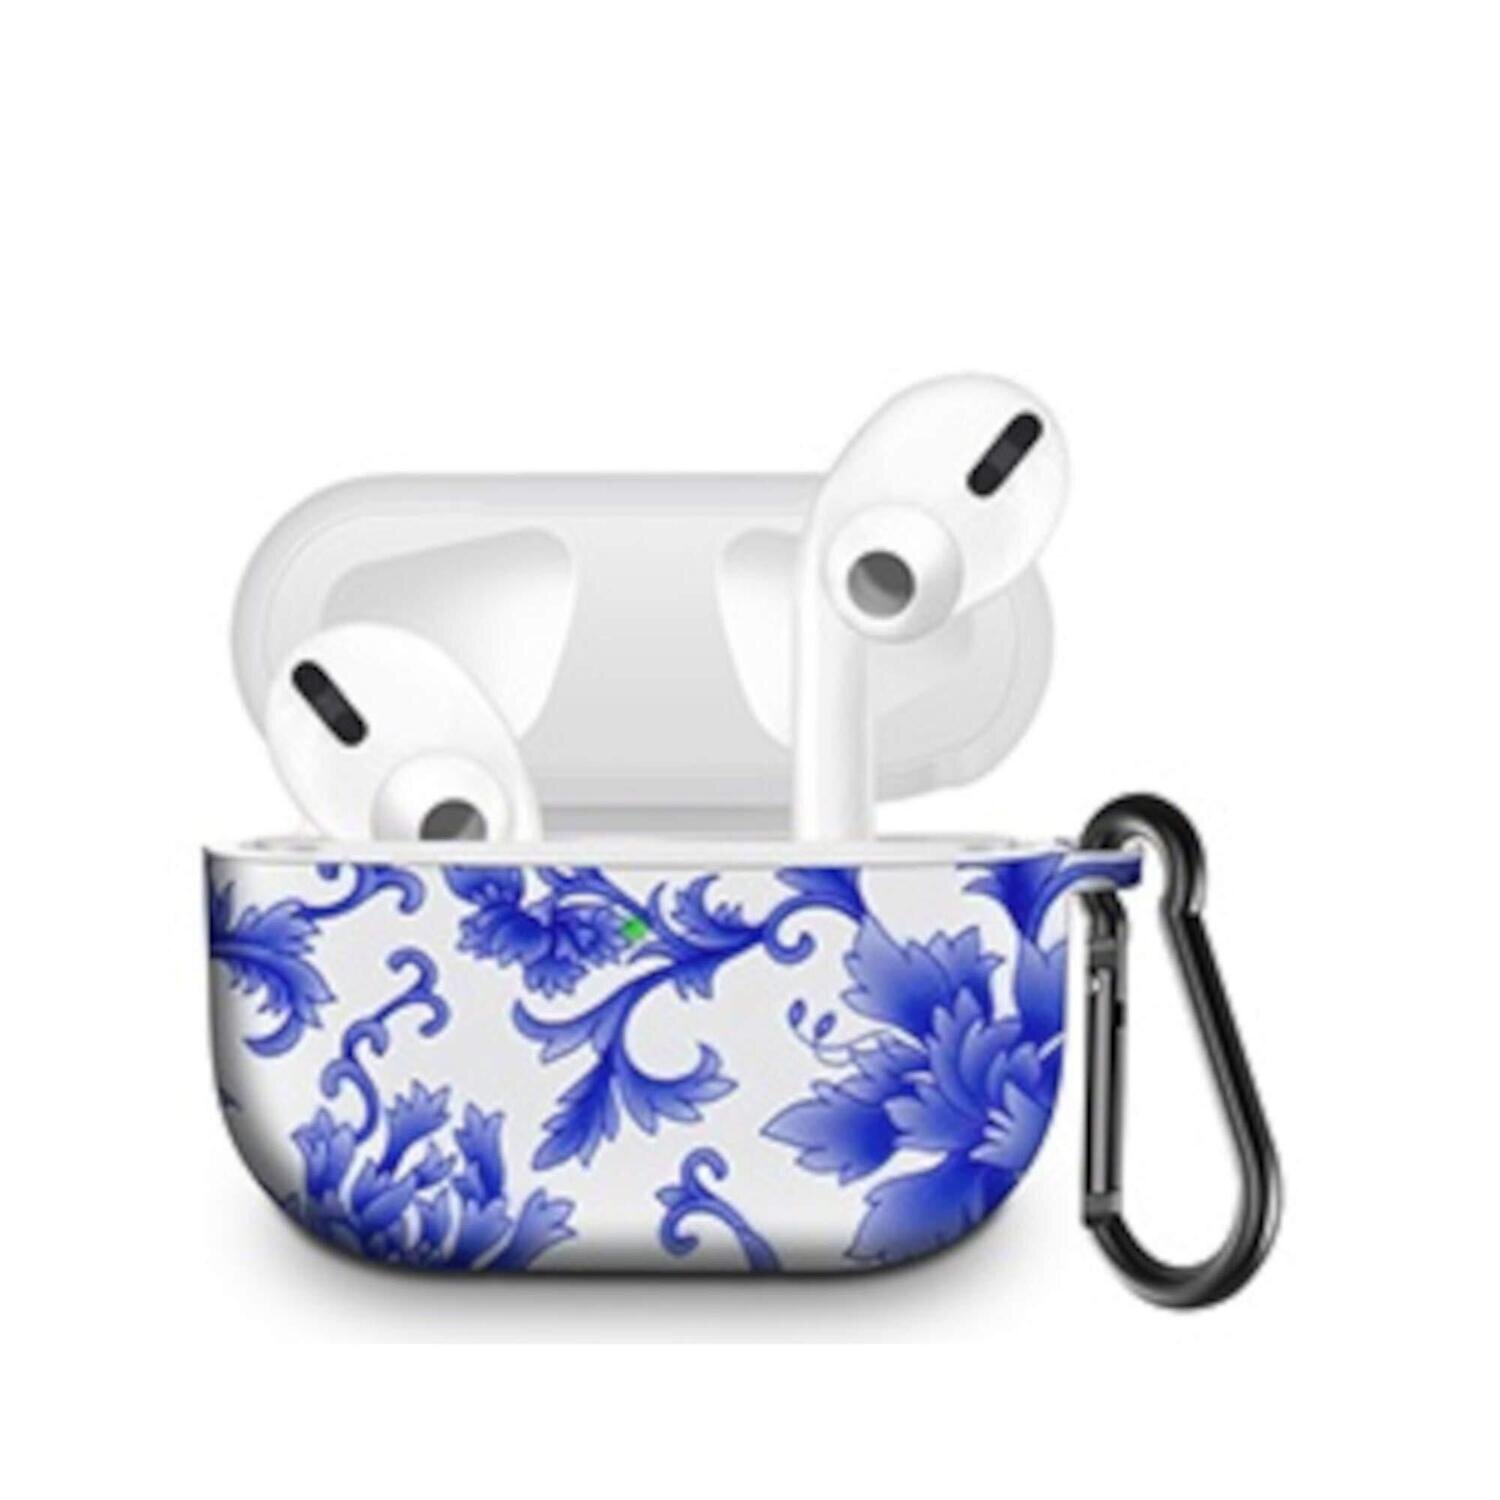 Floral case cover for Airpods Pro | Blue Flowers